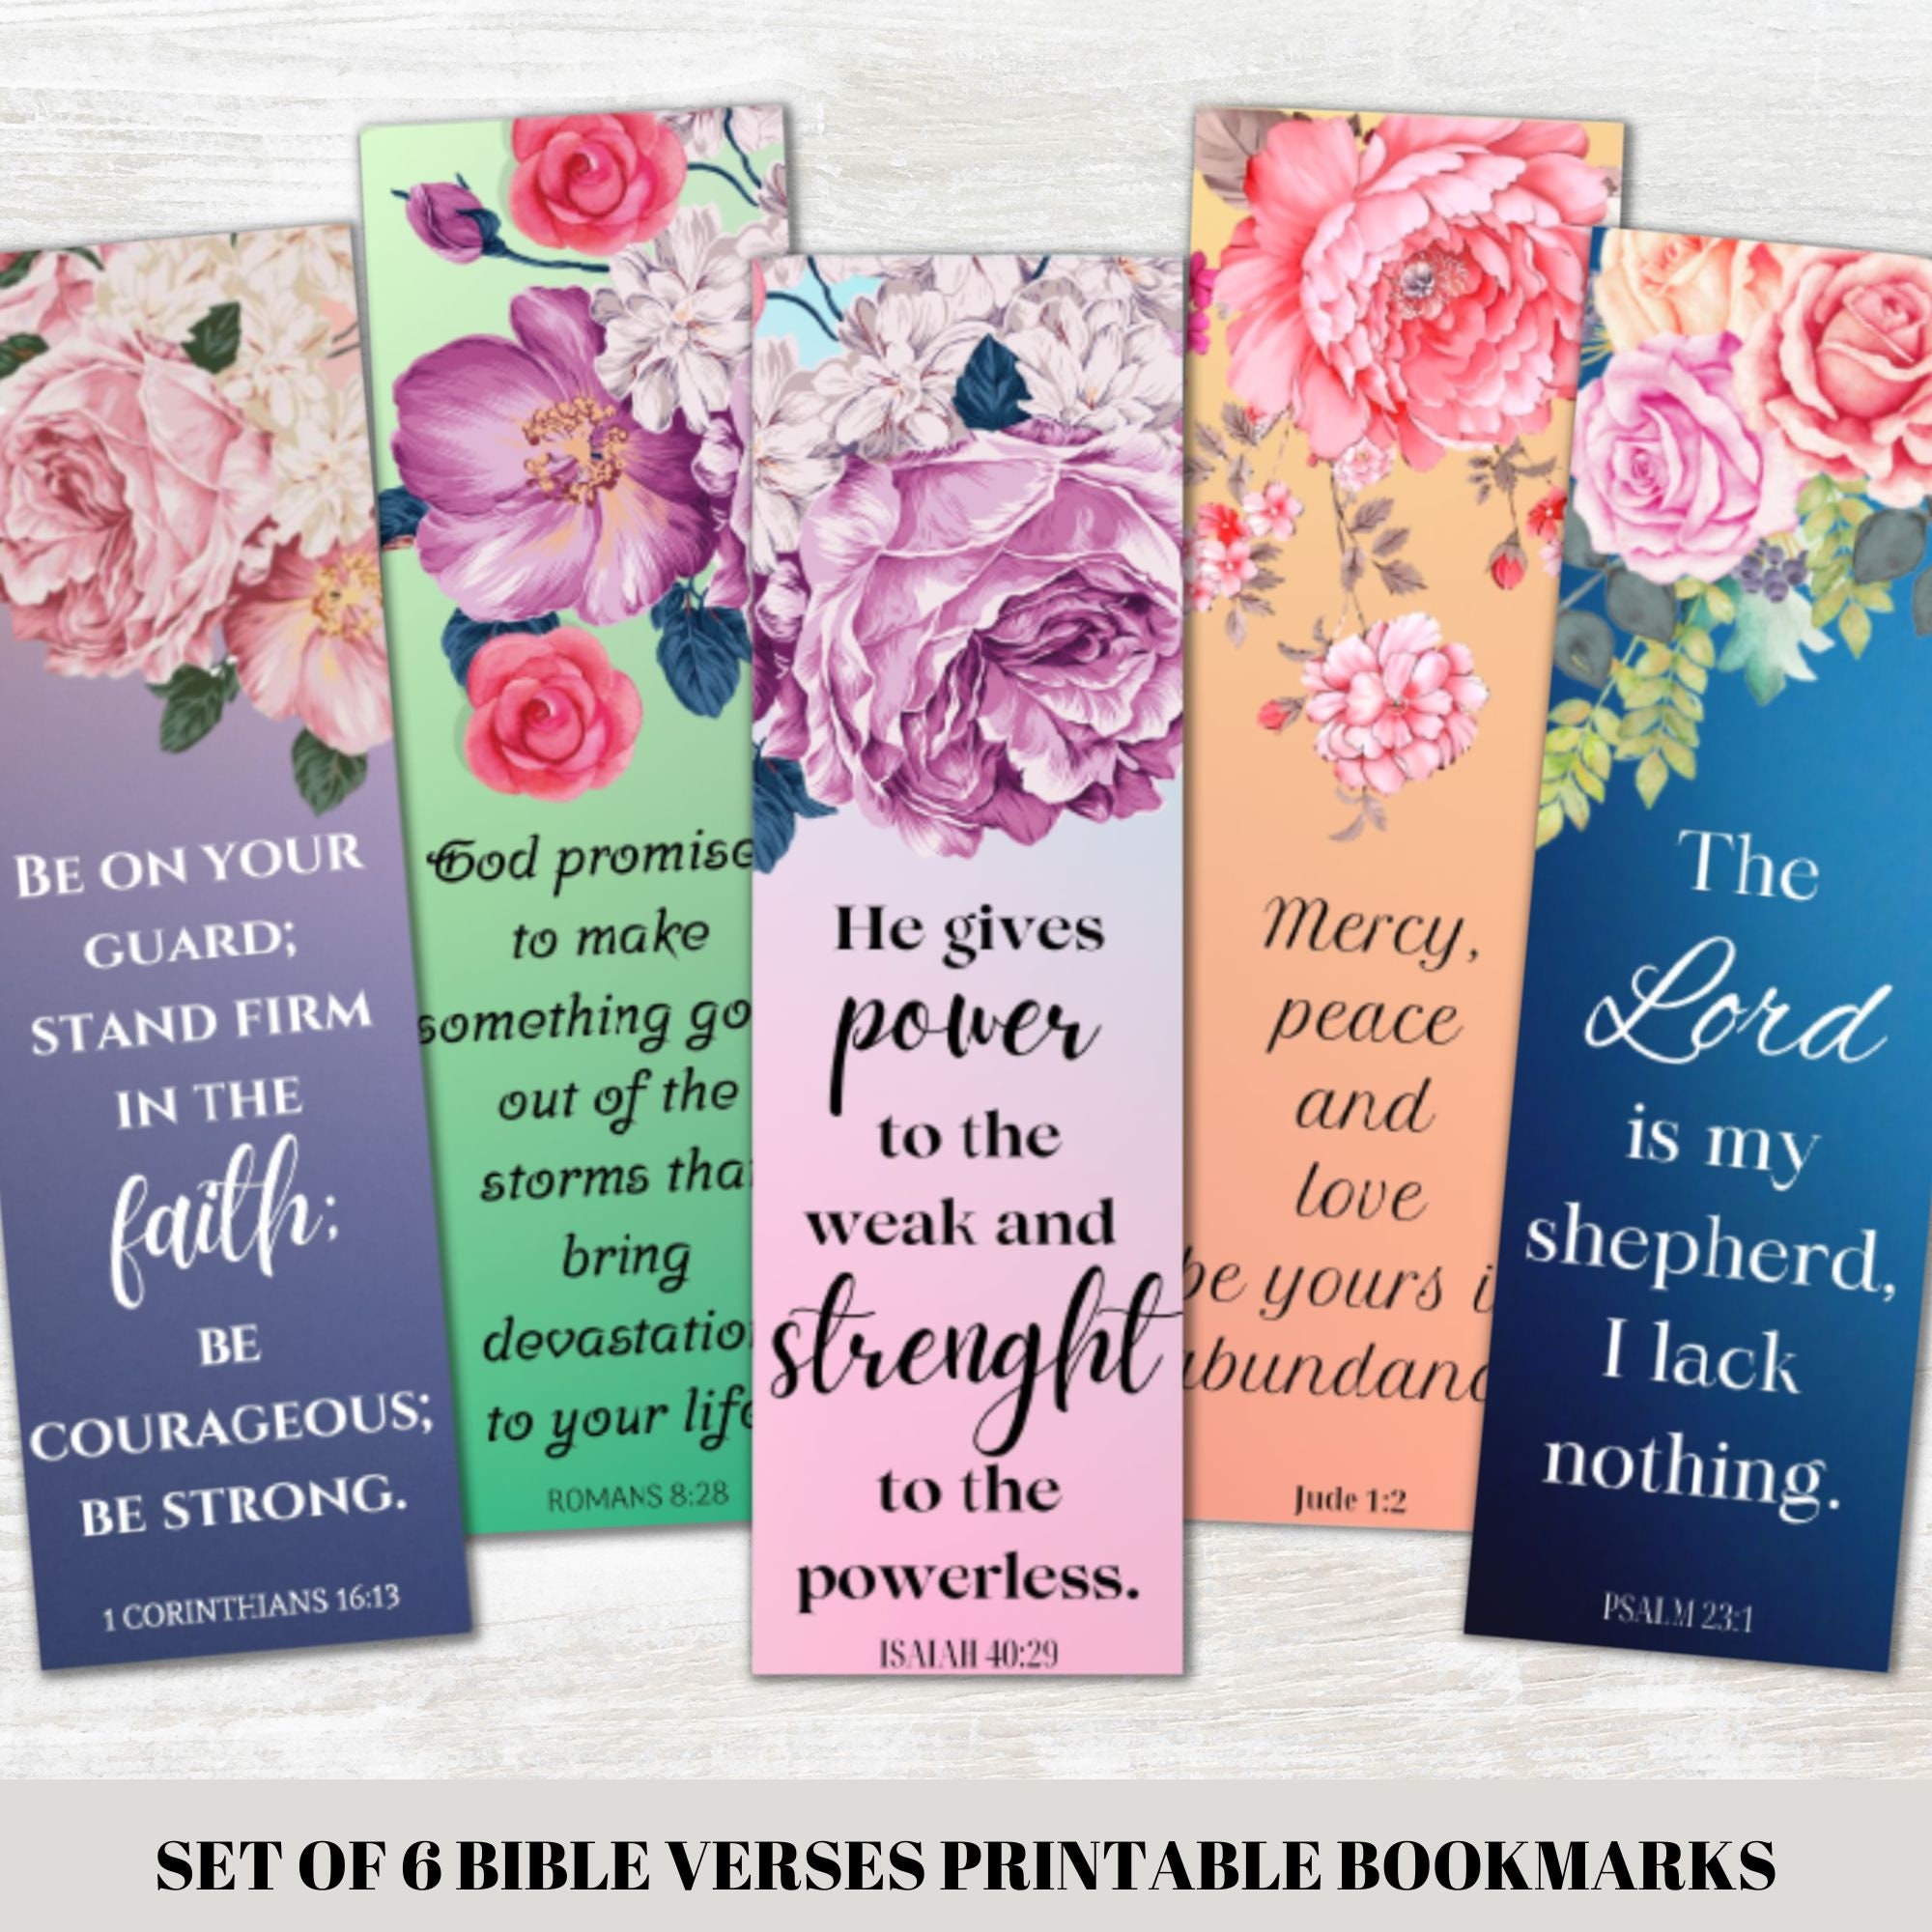 8 Coloring Bookmarks About Reading Cute Markers With Images of Books, Boy,  Girl, Birds, Coffee Inspiring Phrases Digital Download 